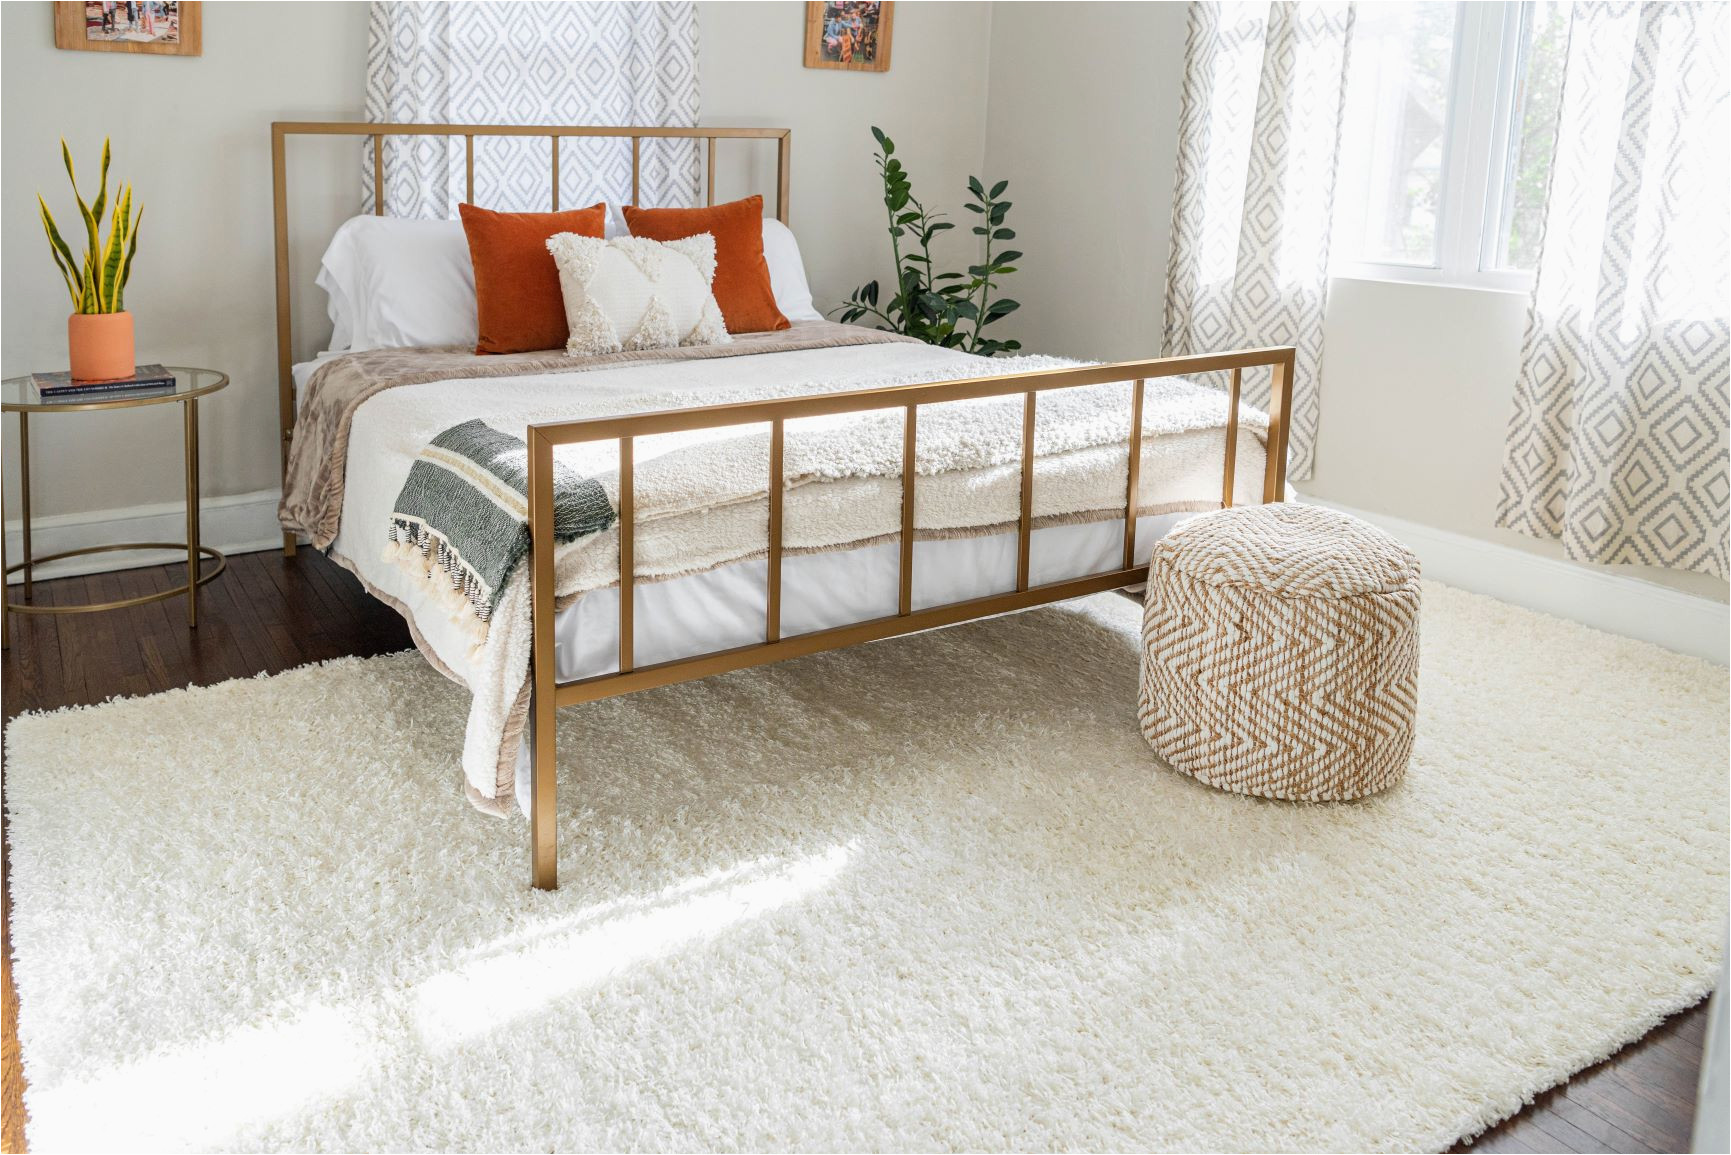 Rug Tape Bed Bath Beyond Picking the Best Bedroom Rug: the Complete Guide Floorspace